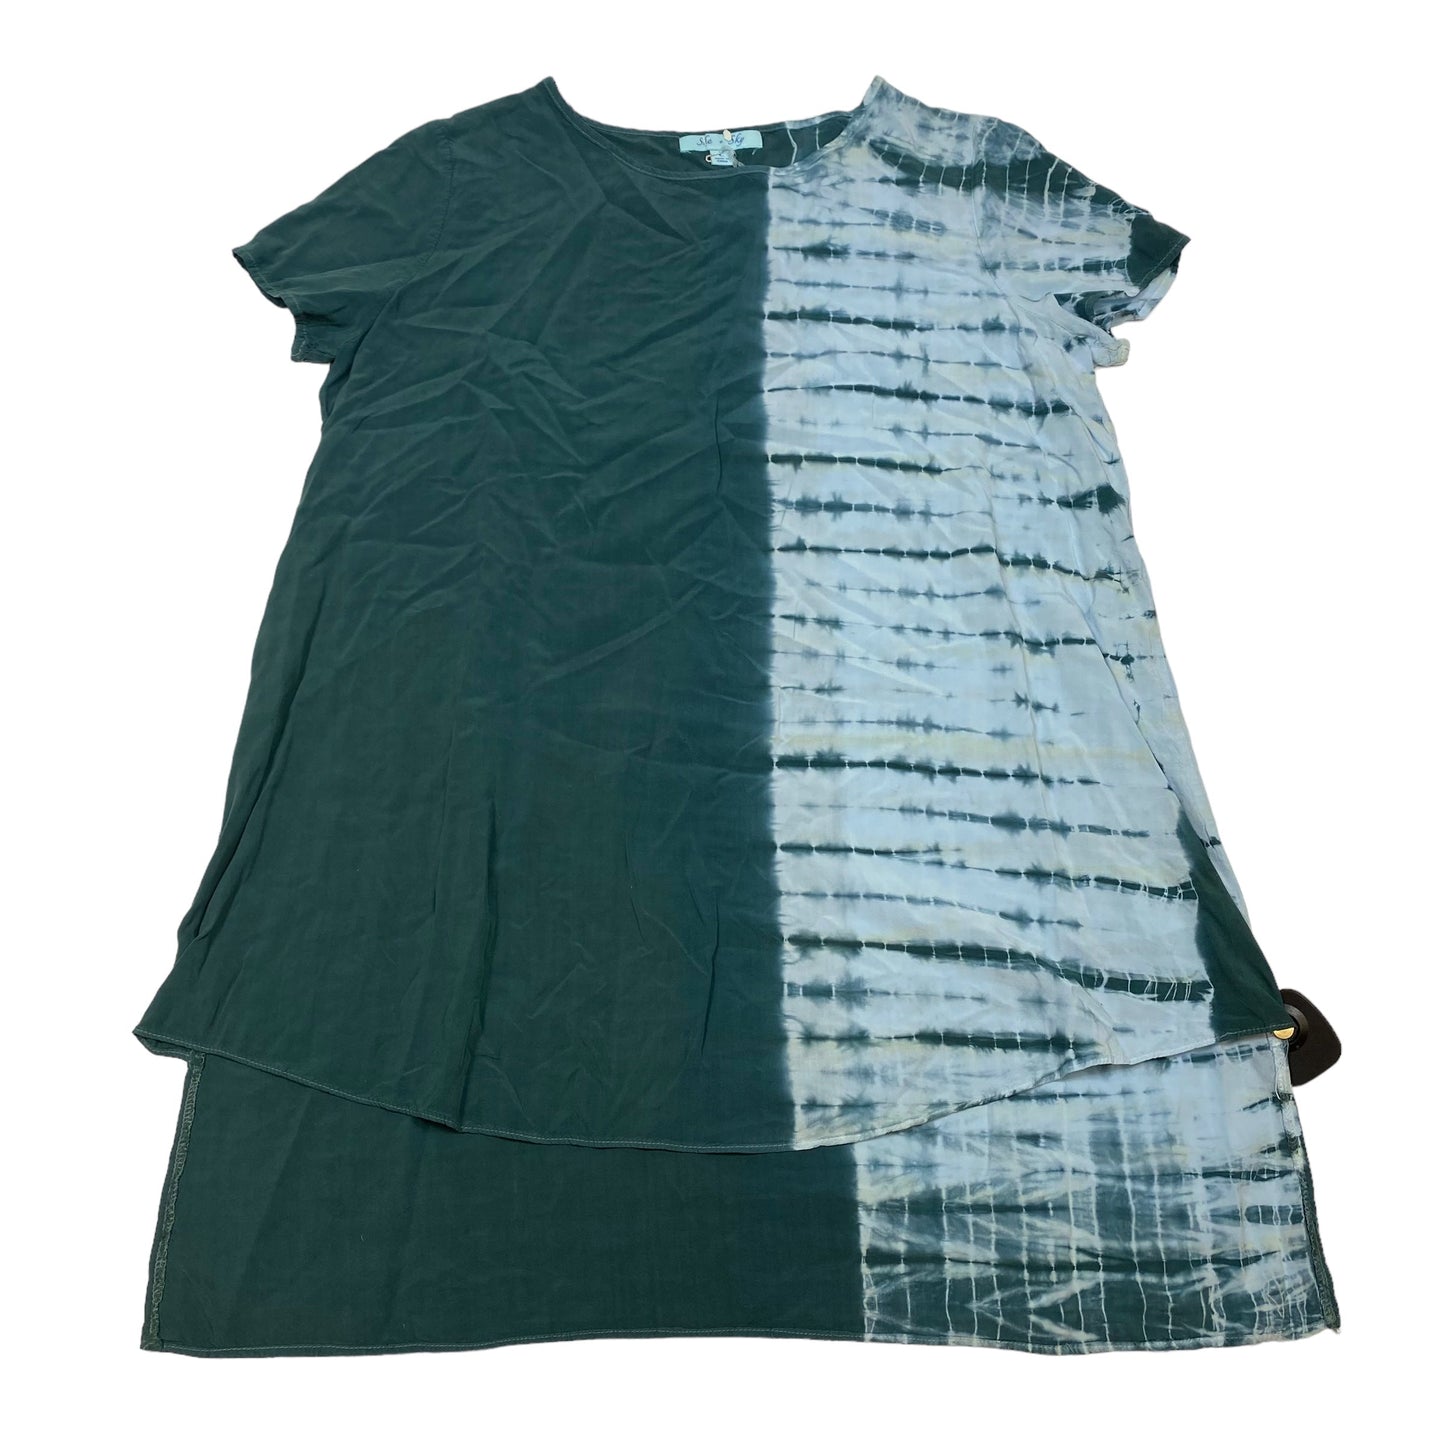 Green Top Short Sleeve She + Sky, Size L